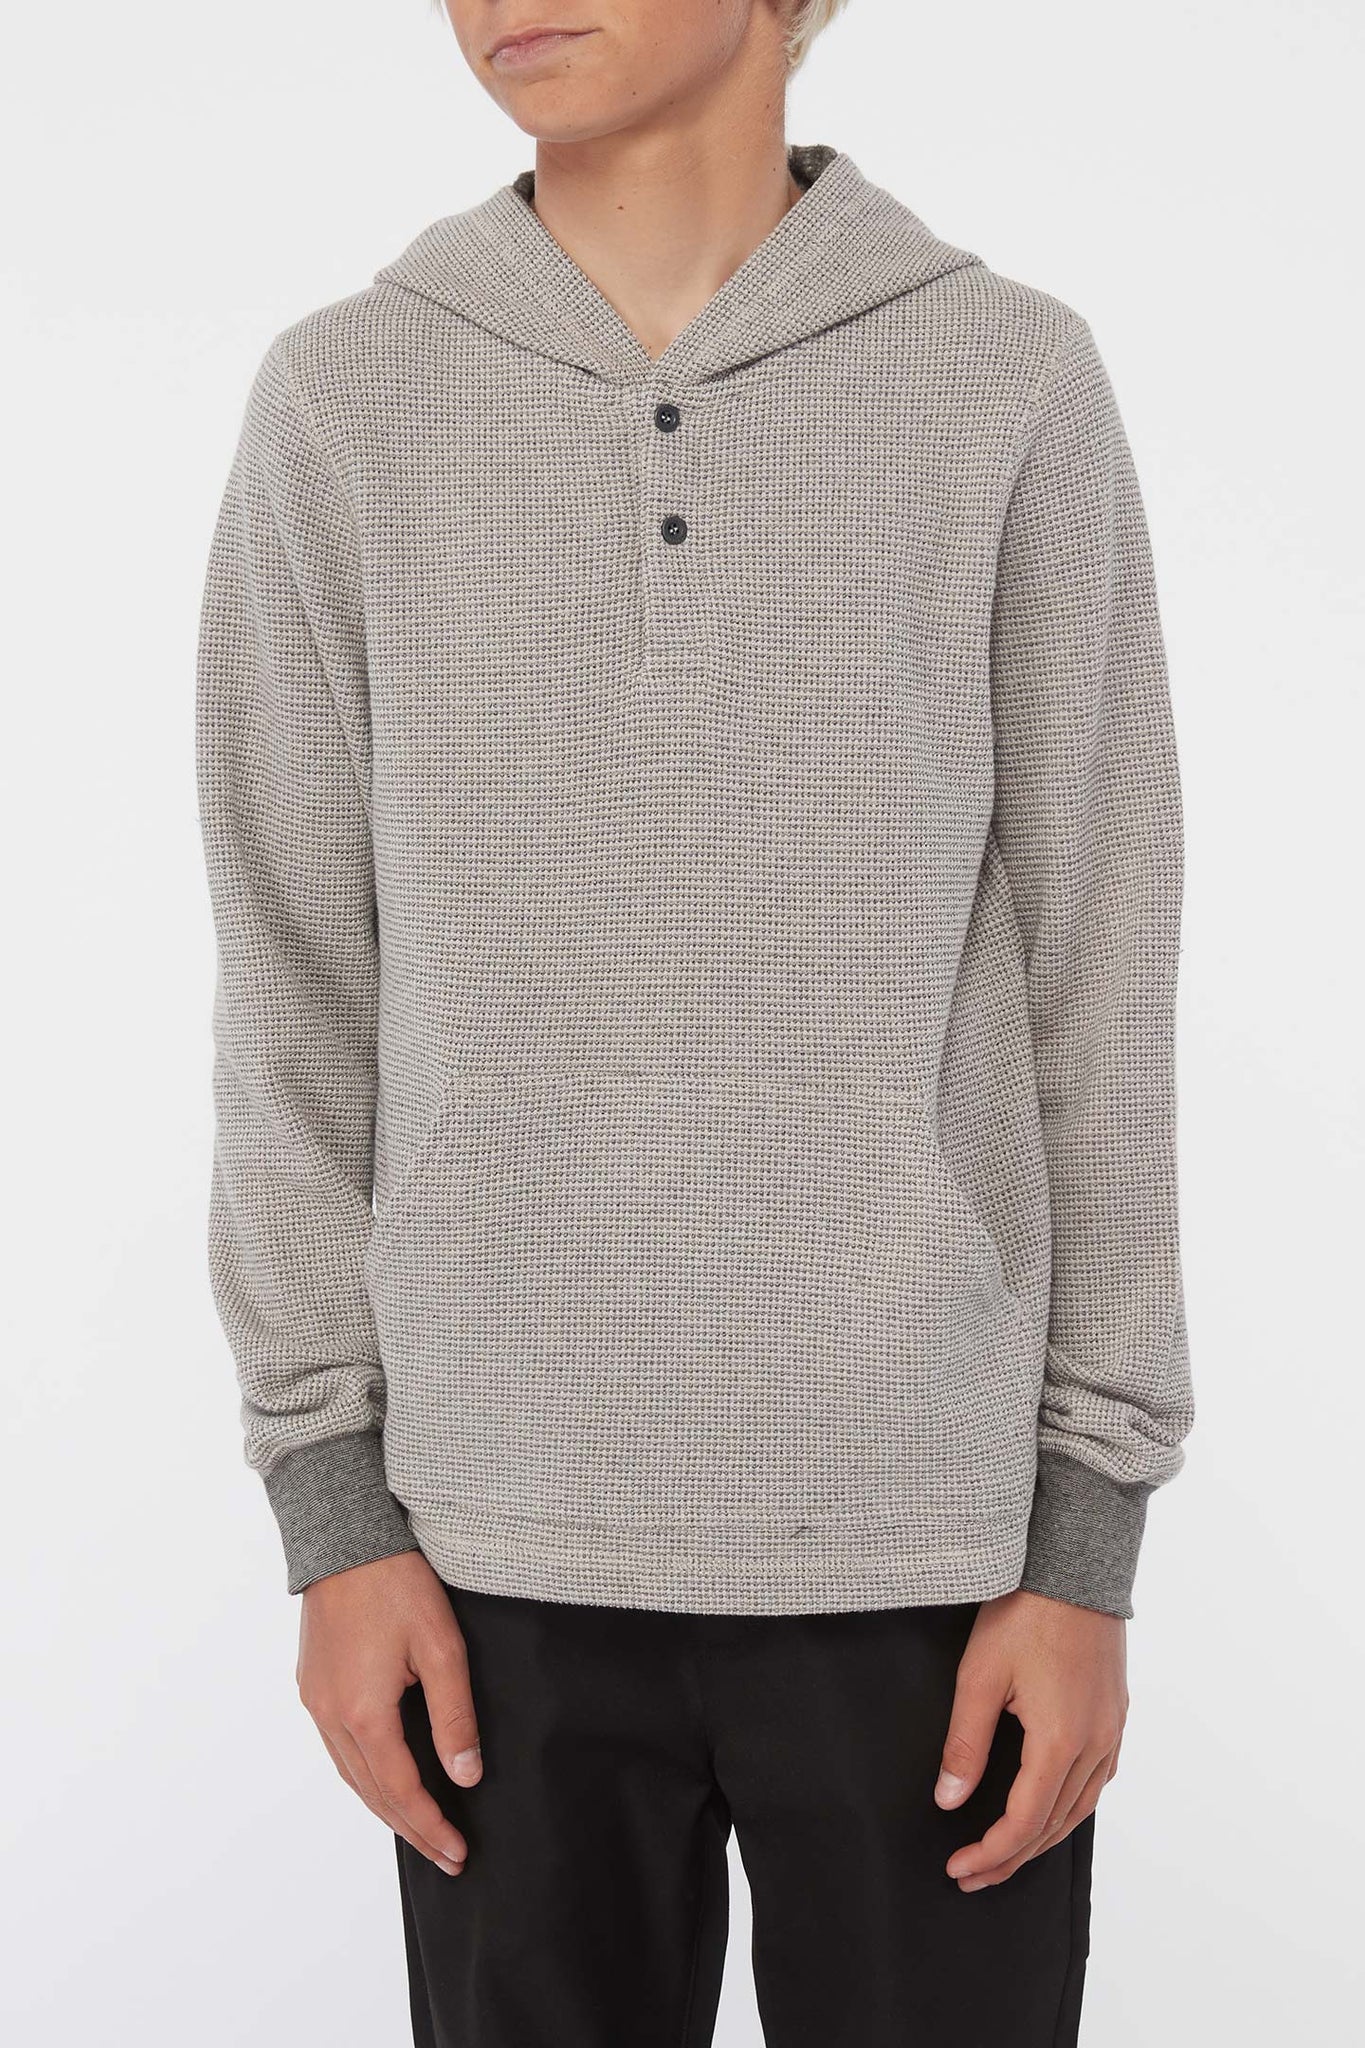 BOY'S OLYMPIA PULLOVER